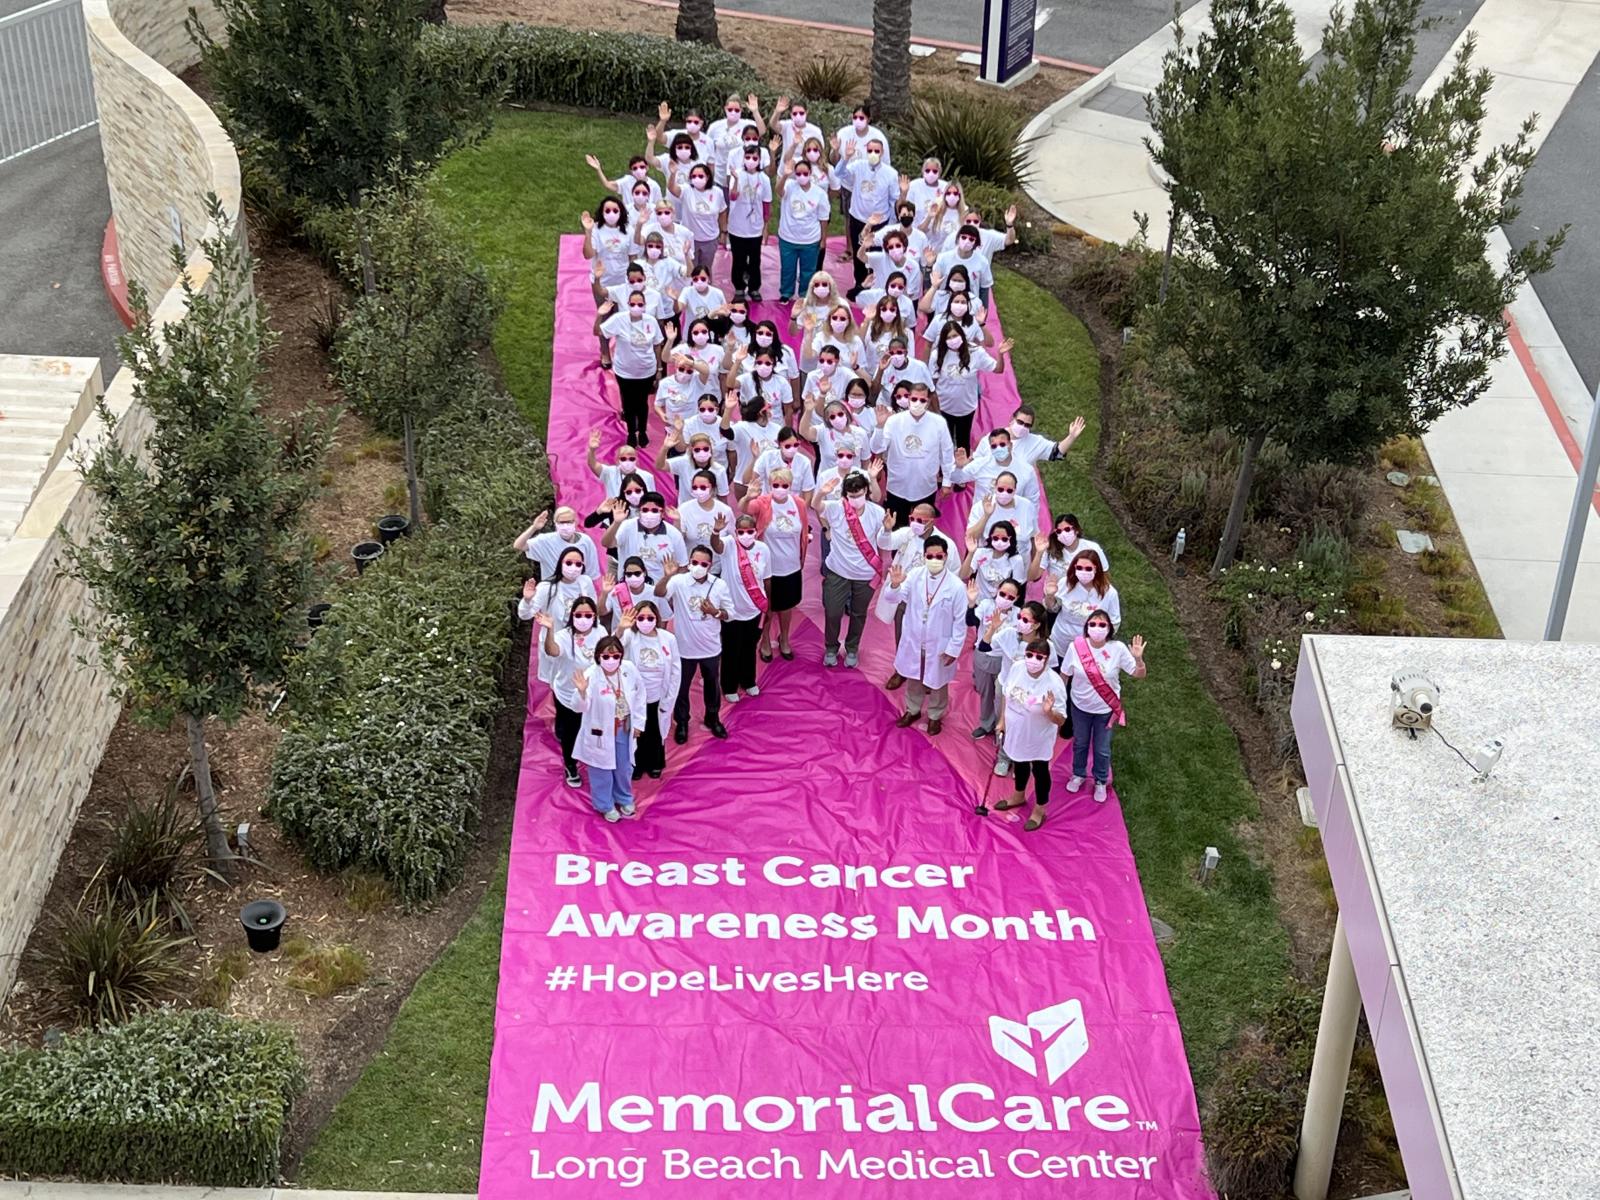 Physicians, employees, and cancer survivors create a giant human awareness ribbon to draw attention  to the importance of breast cancer screenings.